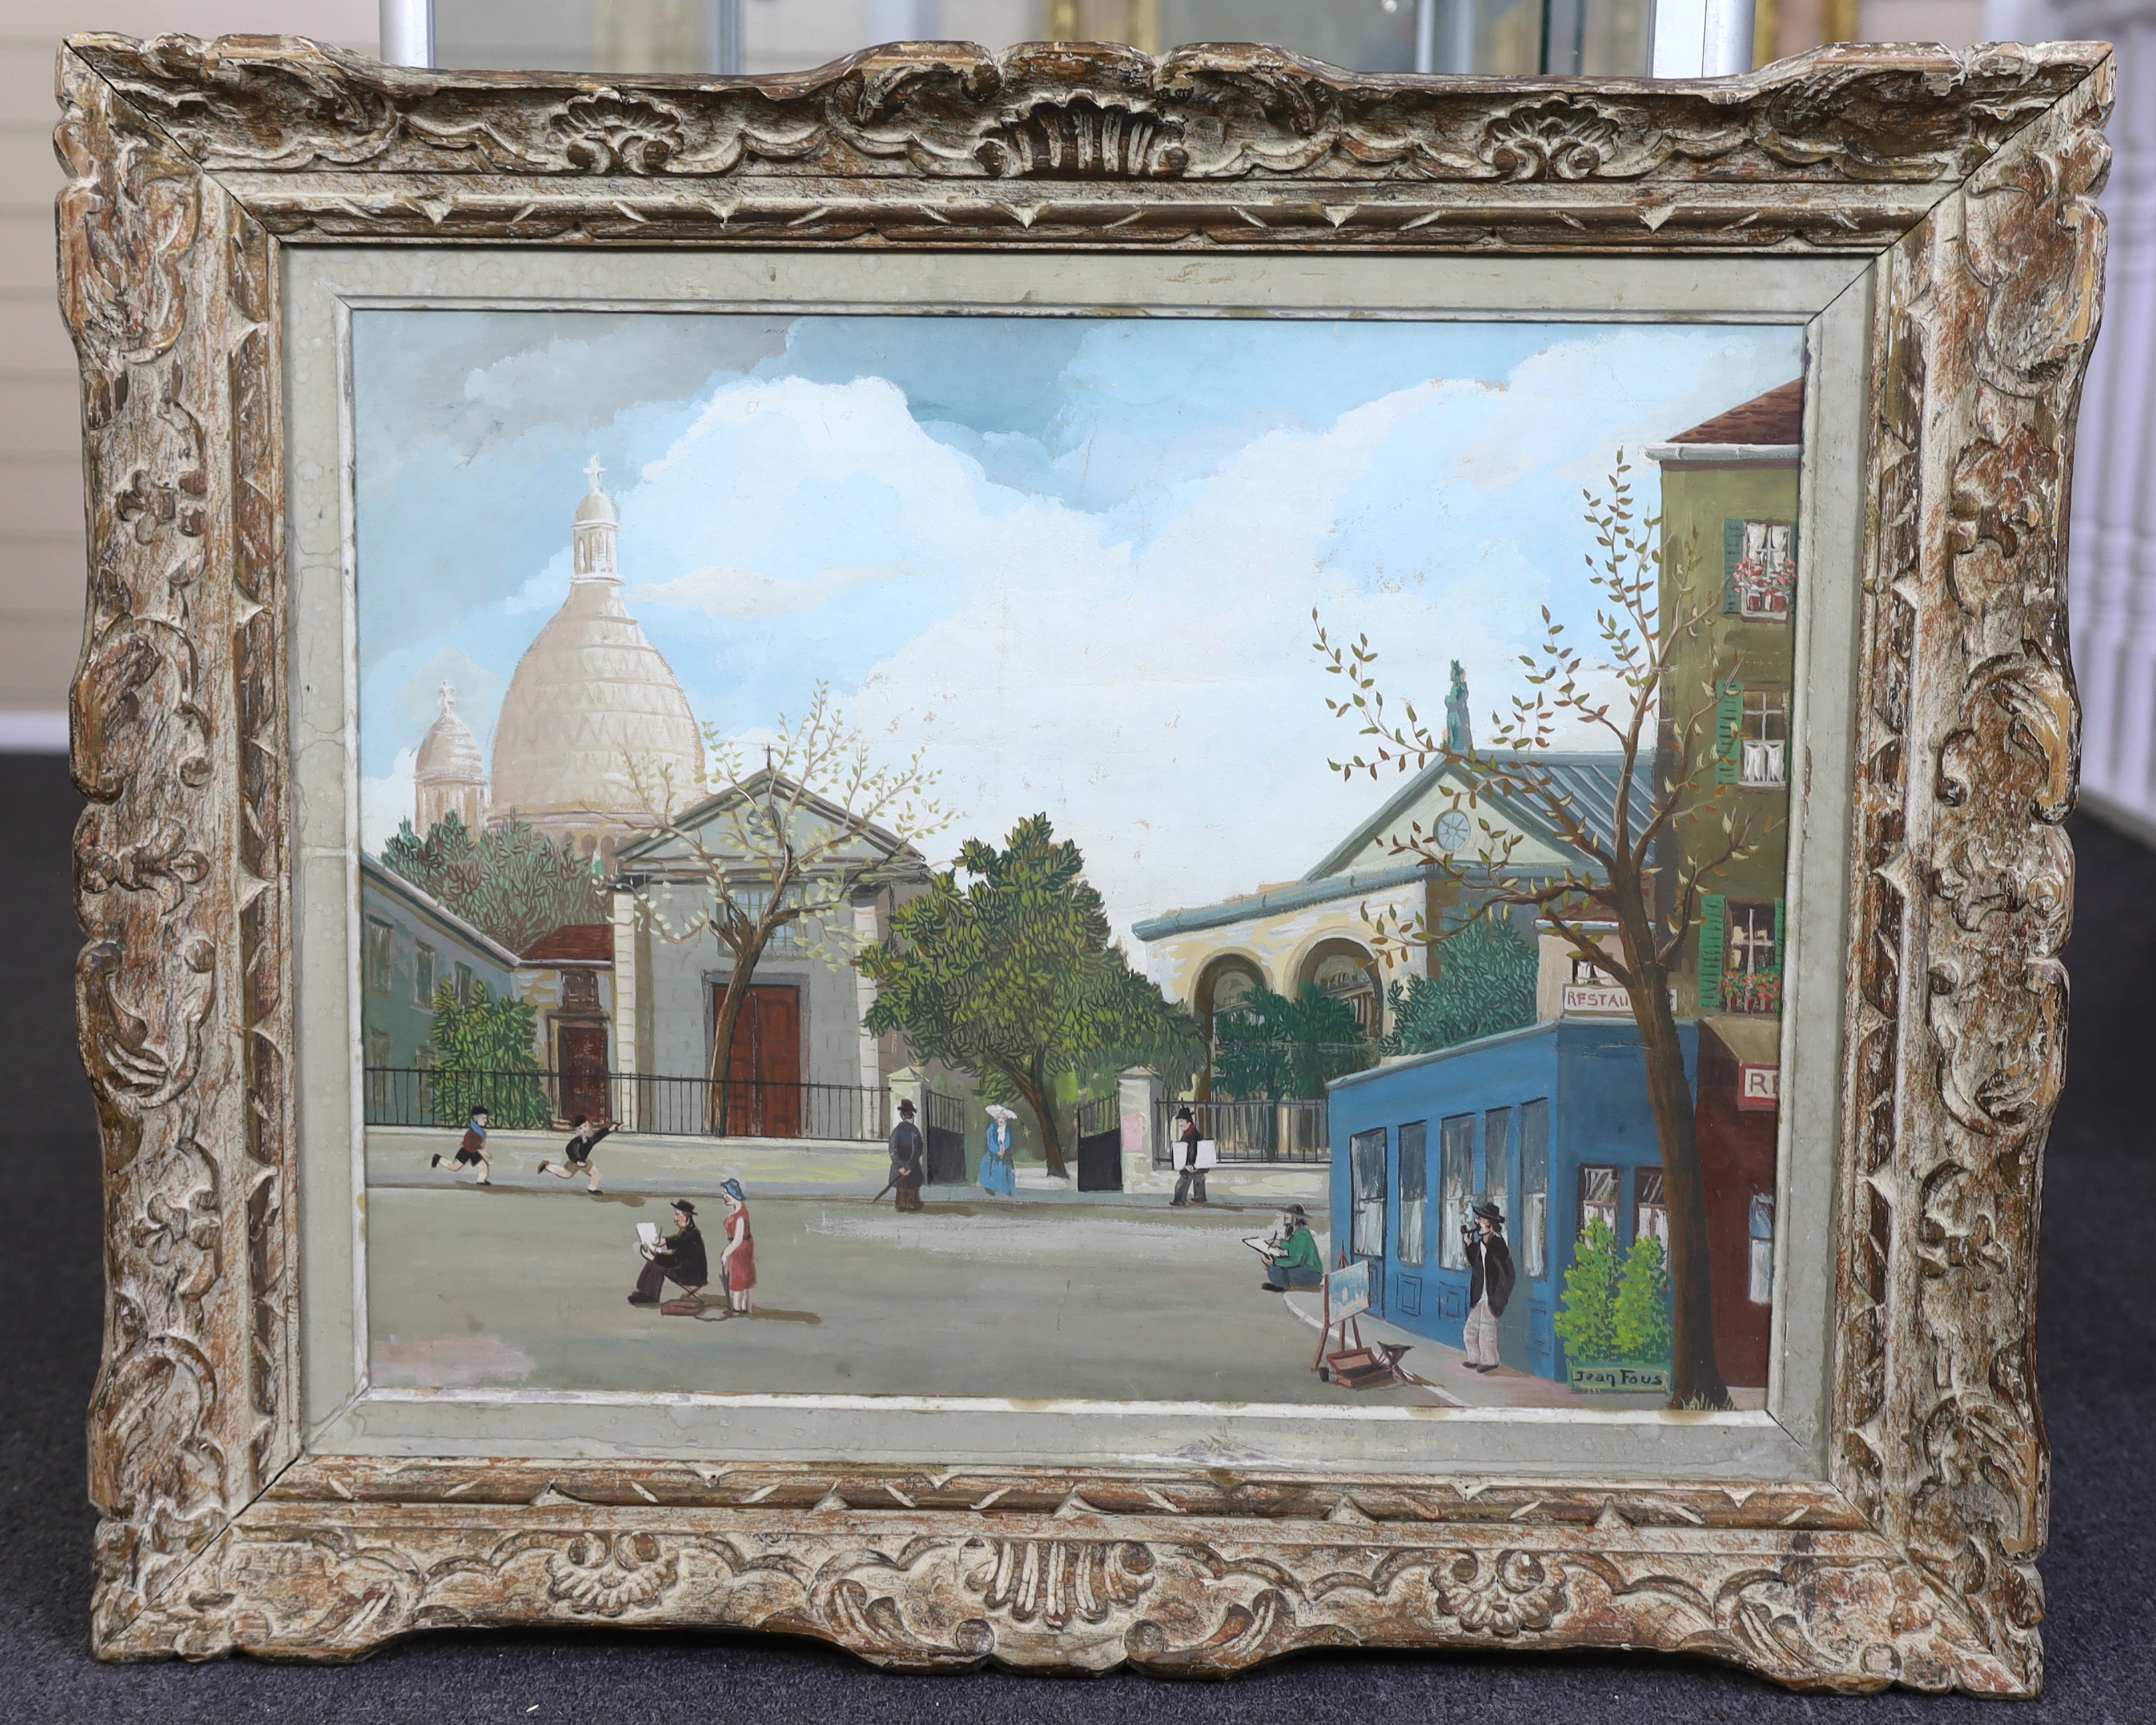 Jean Fous (French, 1901-1971), Parisian street scene with artists at work and the domes of the Sacré Coeur, gouache on card, 48 x 63cm